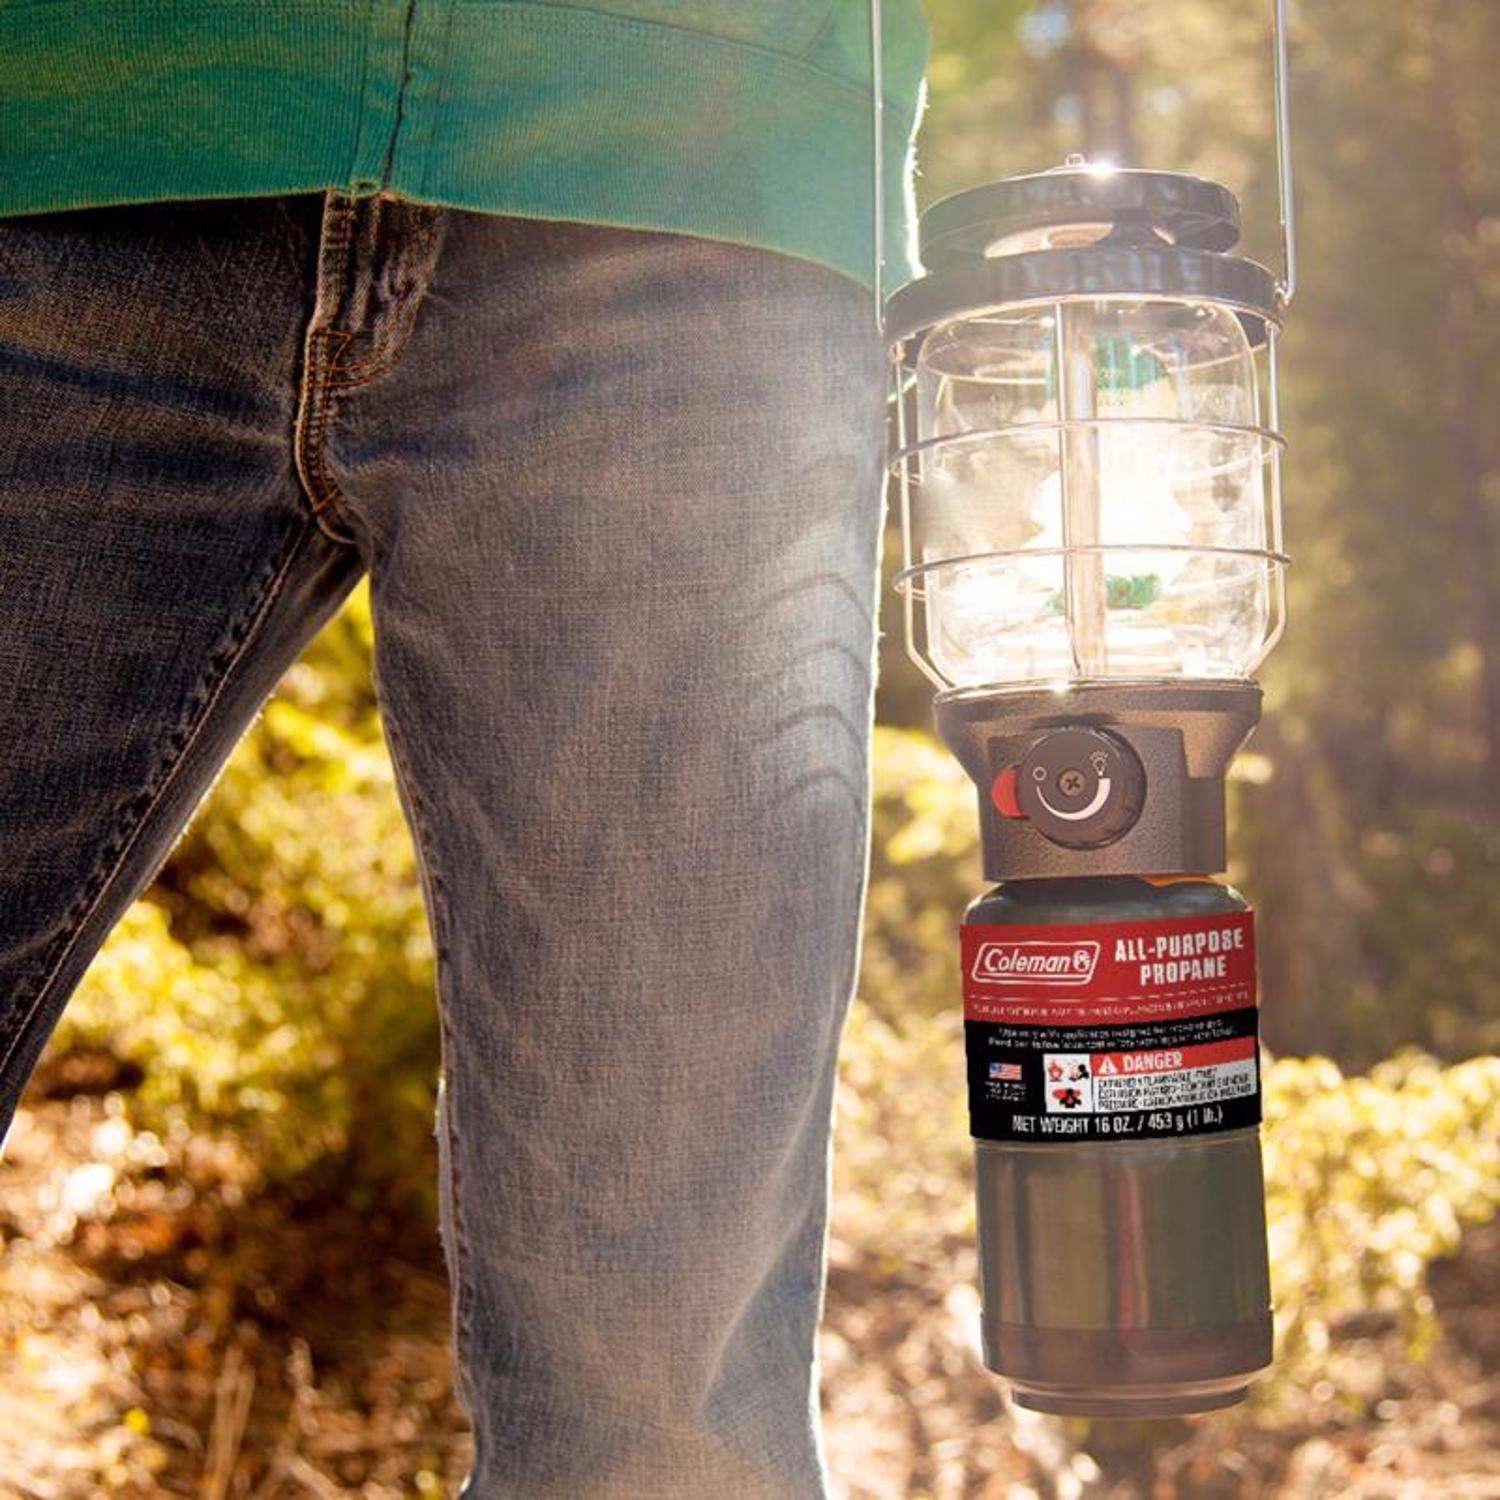 Coleman Battery Lock Pack-Away Electric Lantern, One Size, Blue